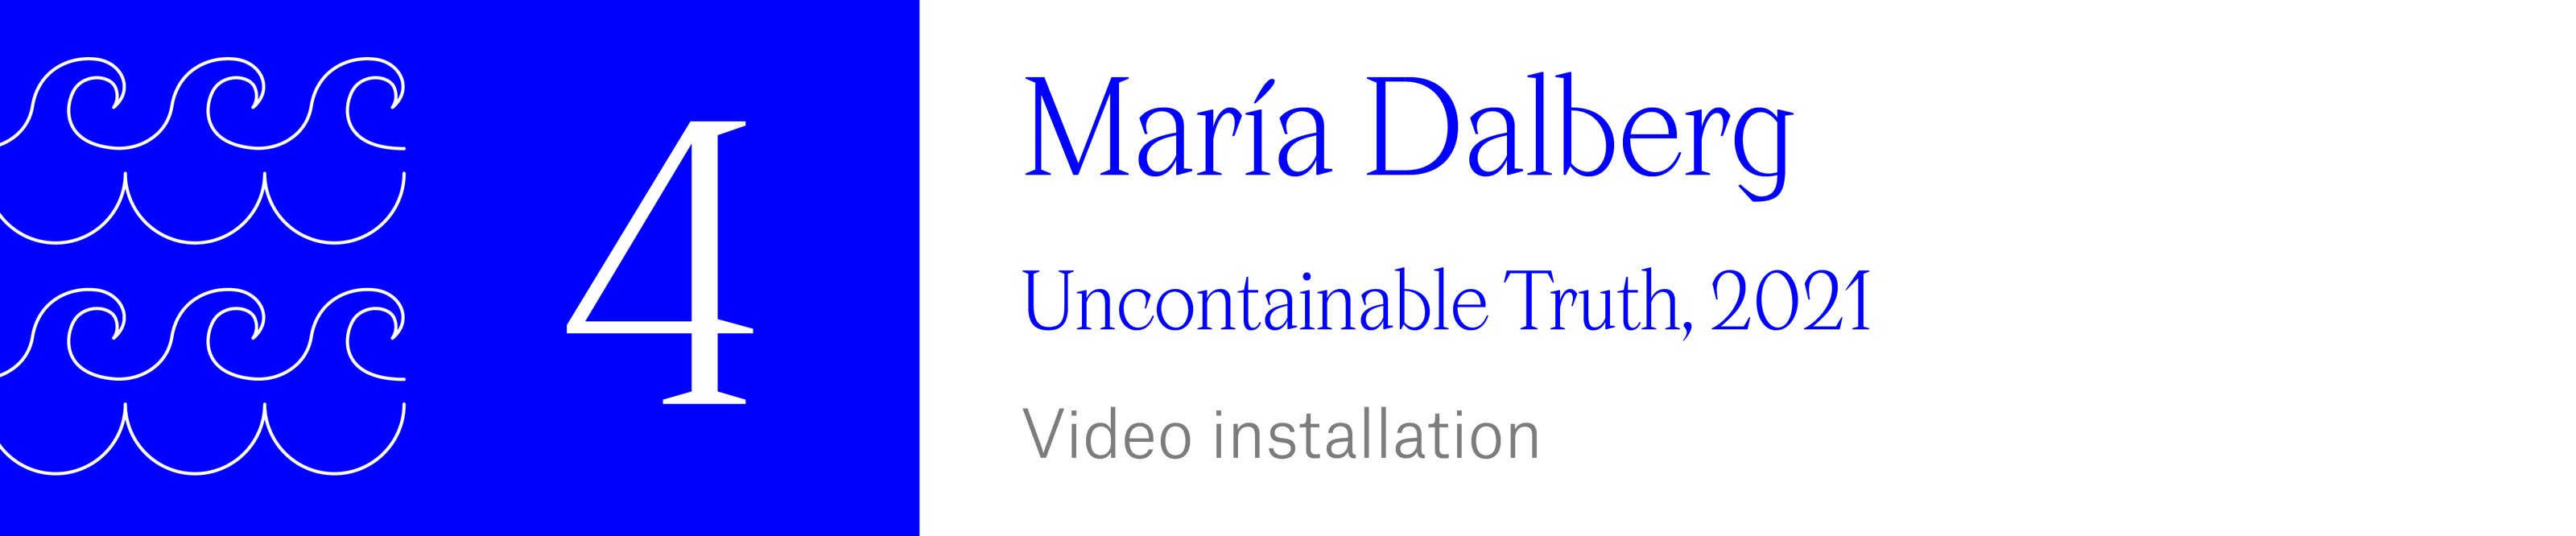 The Wave (4) - María Dalberg Uncontainable Truth, 2021, Video installation